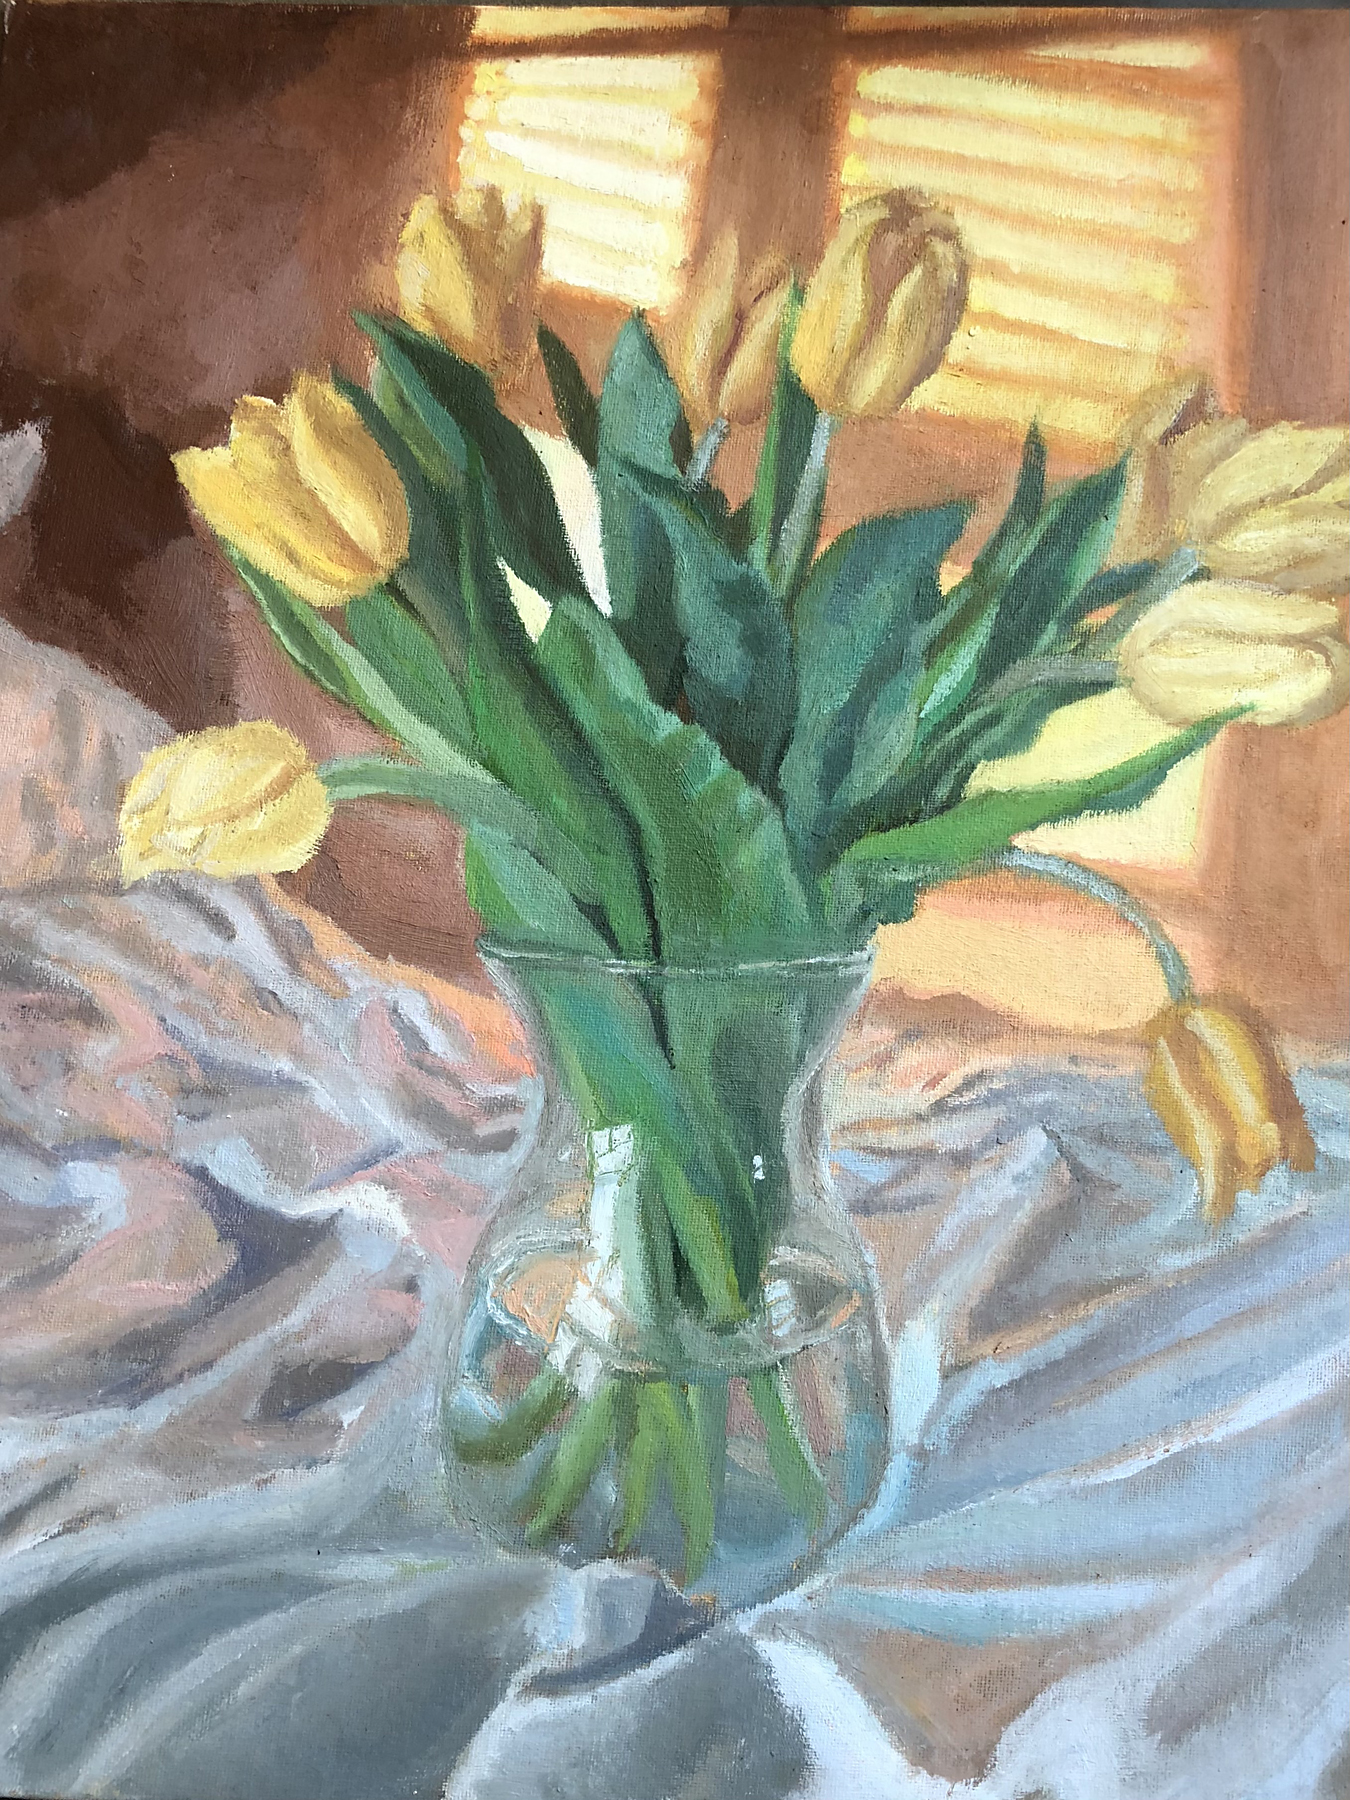 A vase of yellow tulips sits on a white tablecloth with light streaming in the window behind it